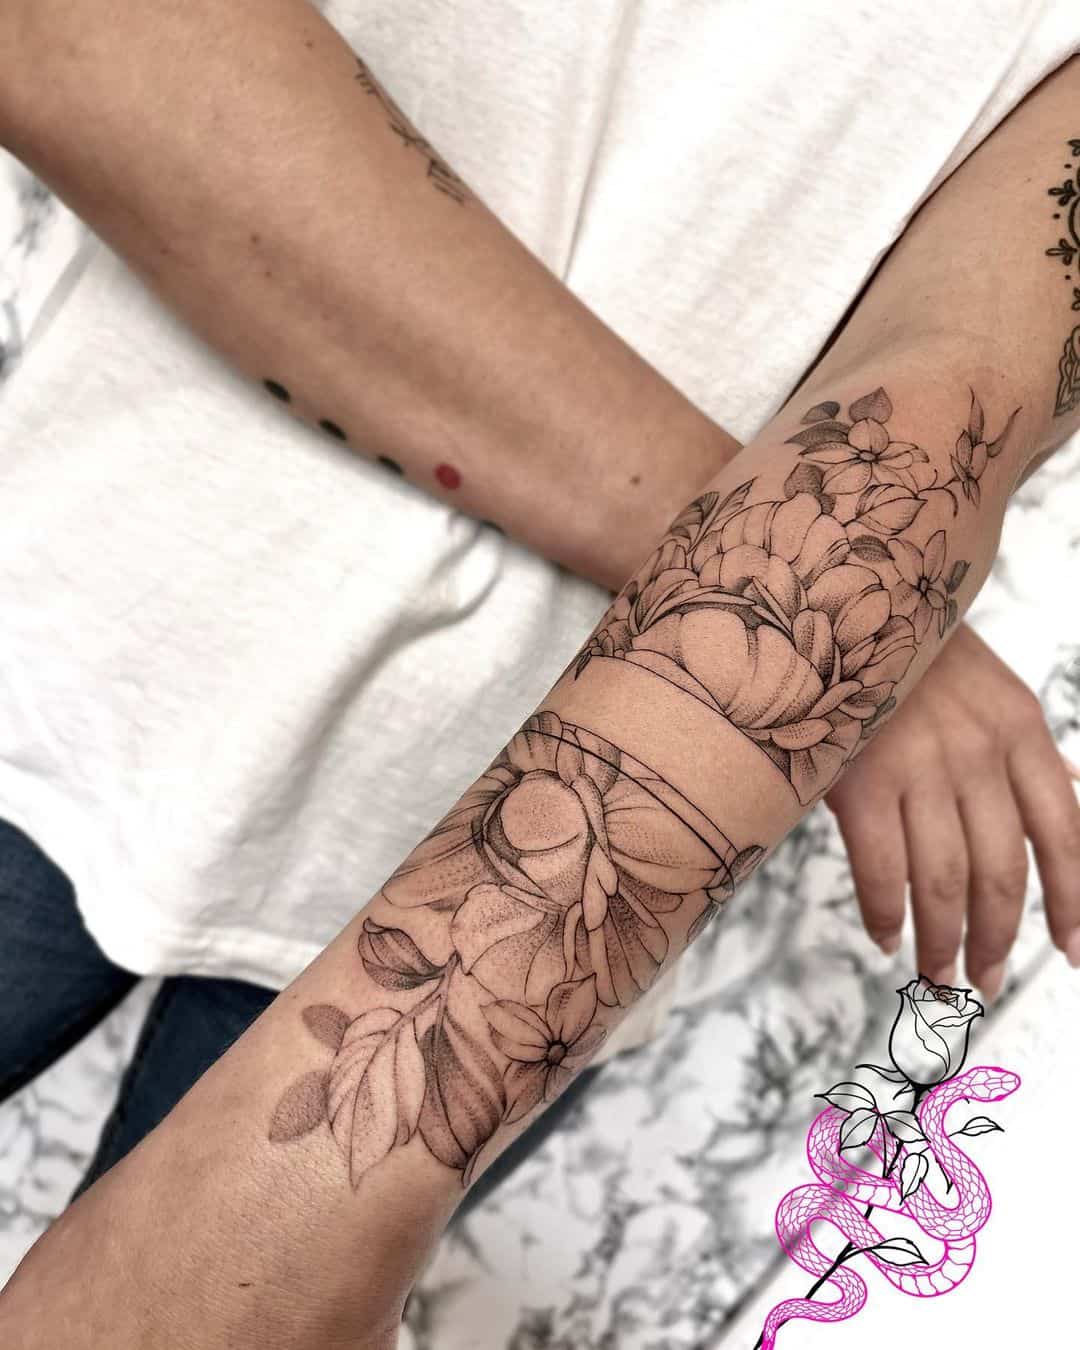 Flower tattoo on arm by unique.art tattoo